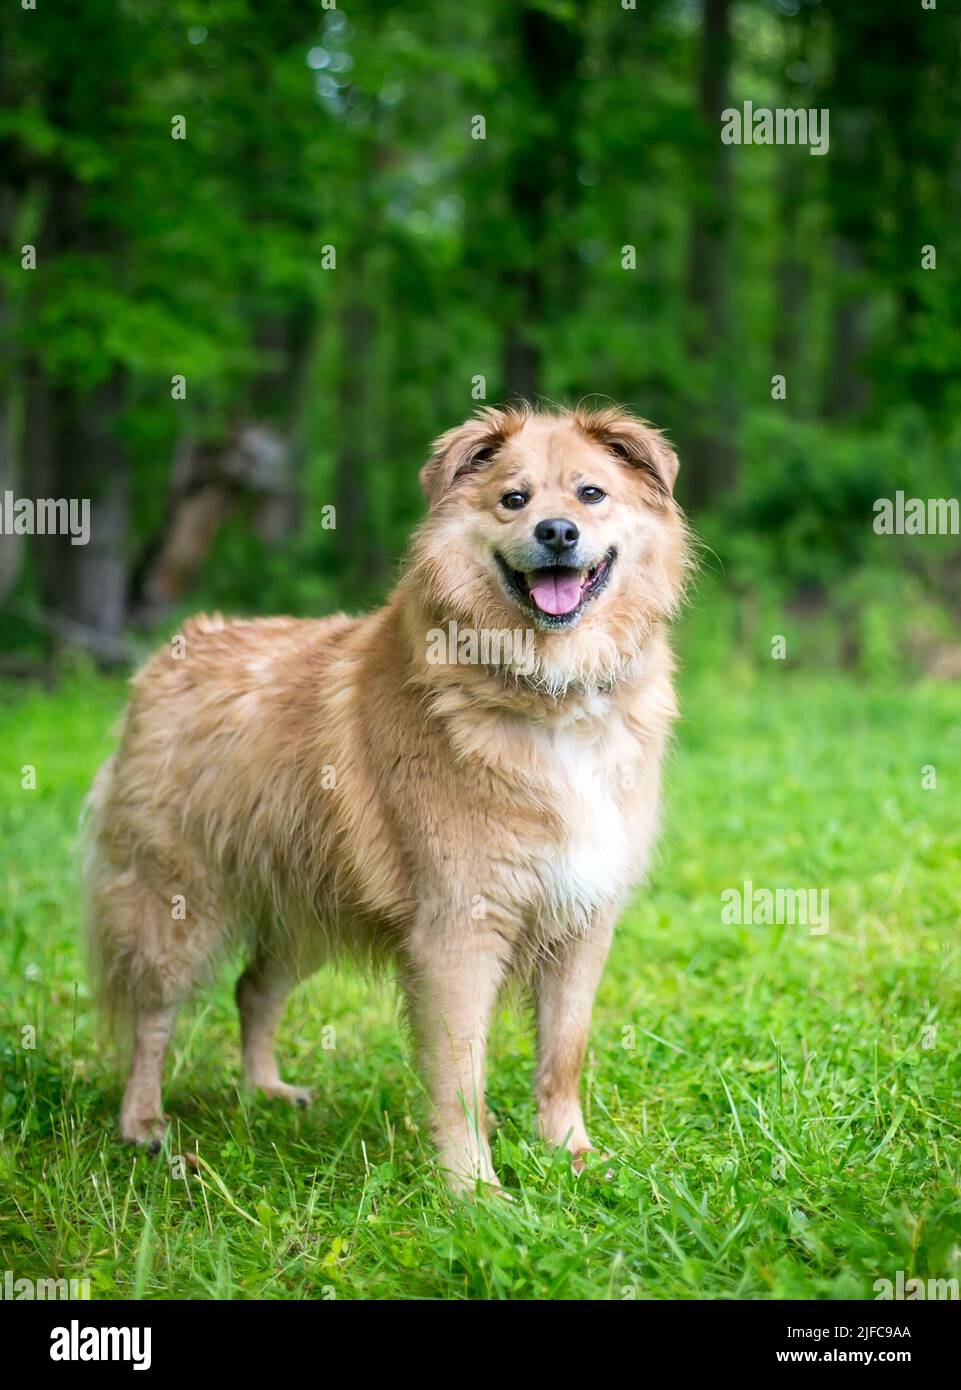 A happy Retriever x Chow Chow mixed breed dog standing outdoors Stock Photo